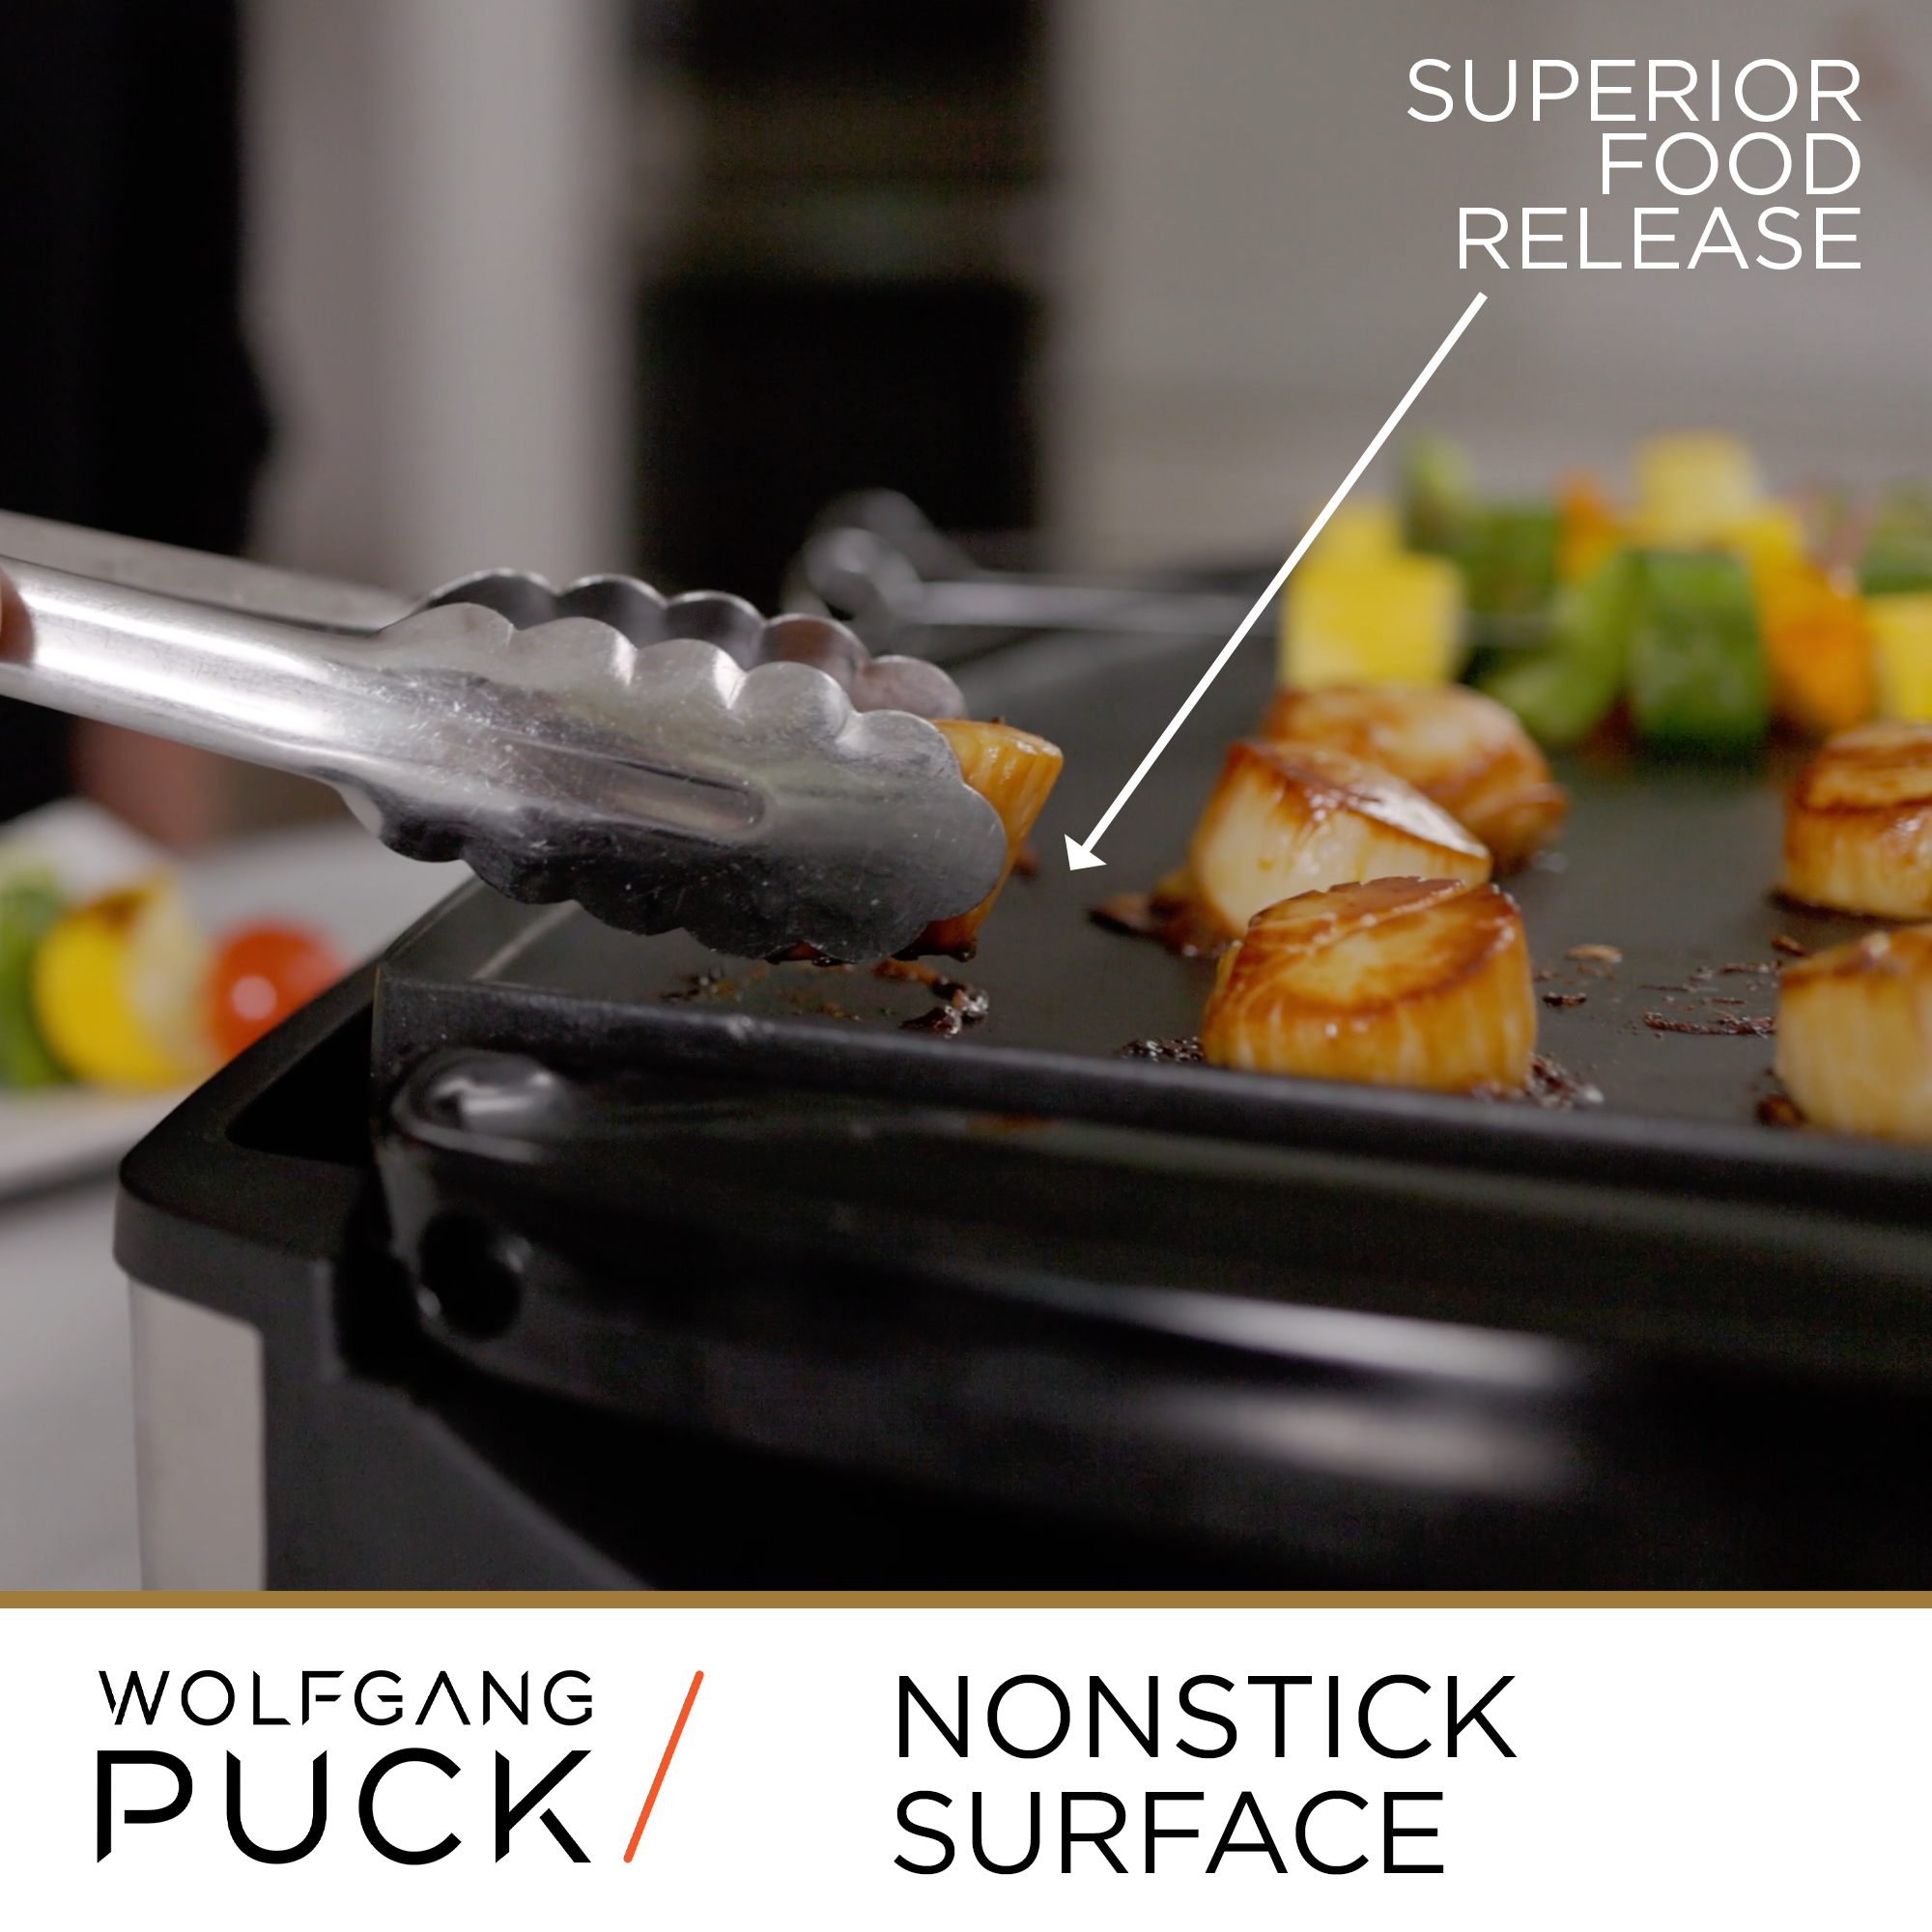 Wolfgang Puck XL Reversible Grill Griddle – Wolfgang Puck Home